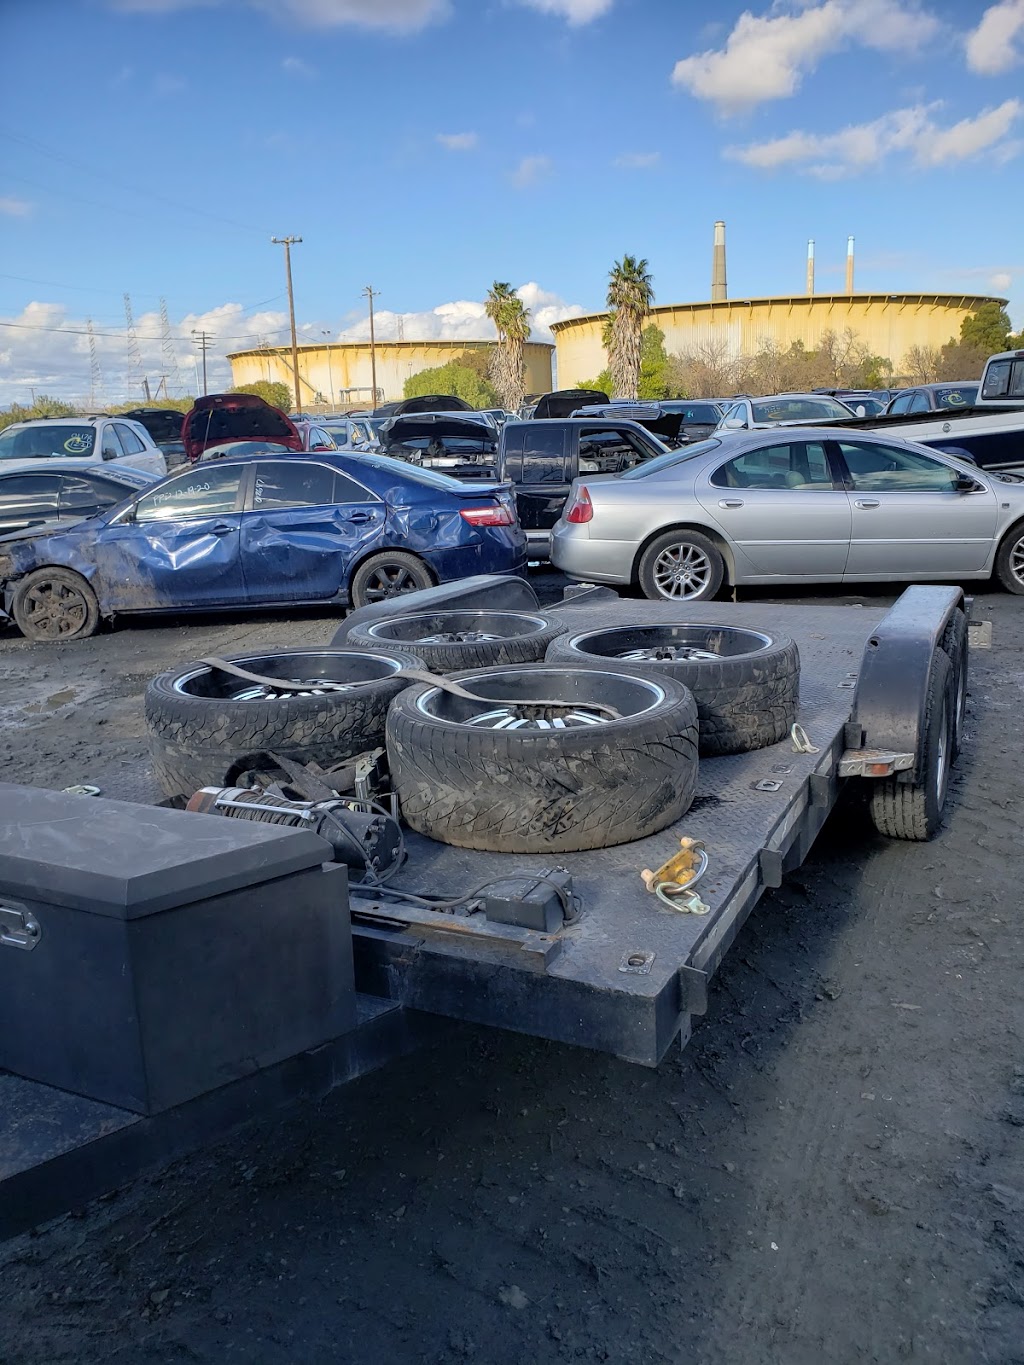 Fernandes Auto Wrecking & Towing Inc | 650 W 10th St, Pittsburg, CA 94565 | Phone: (925) 458-4400